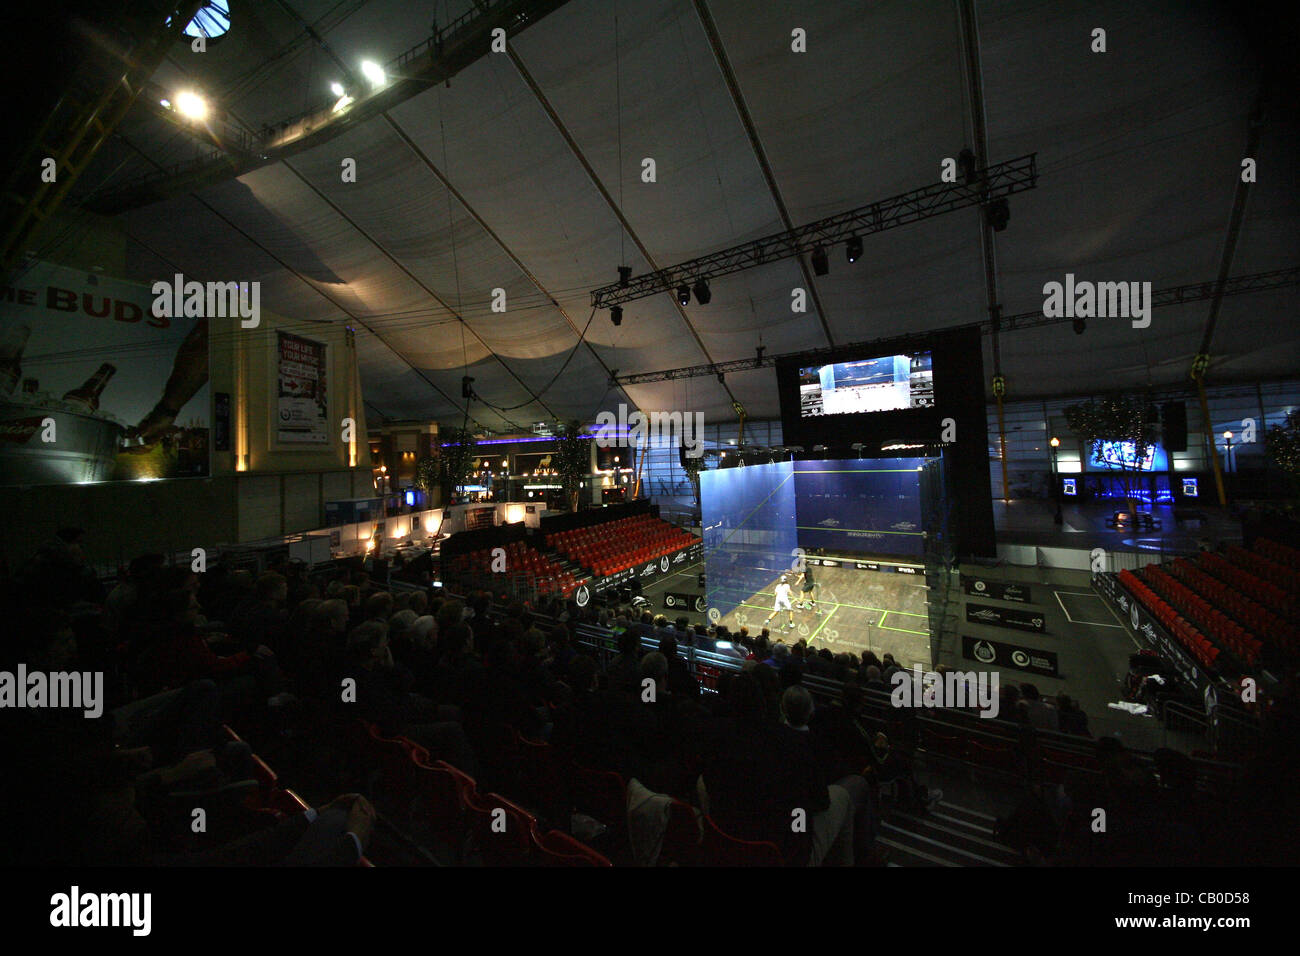 14.05.2012 The O2, London, England. A general view of the court inside the O2 arena. Stock Photo